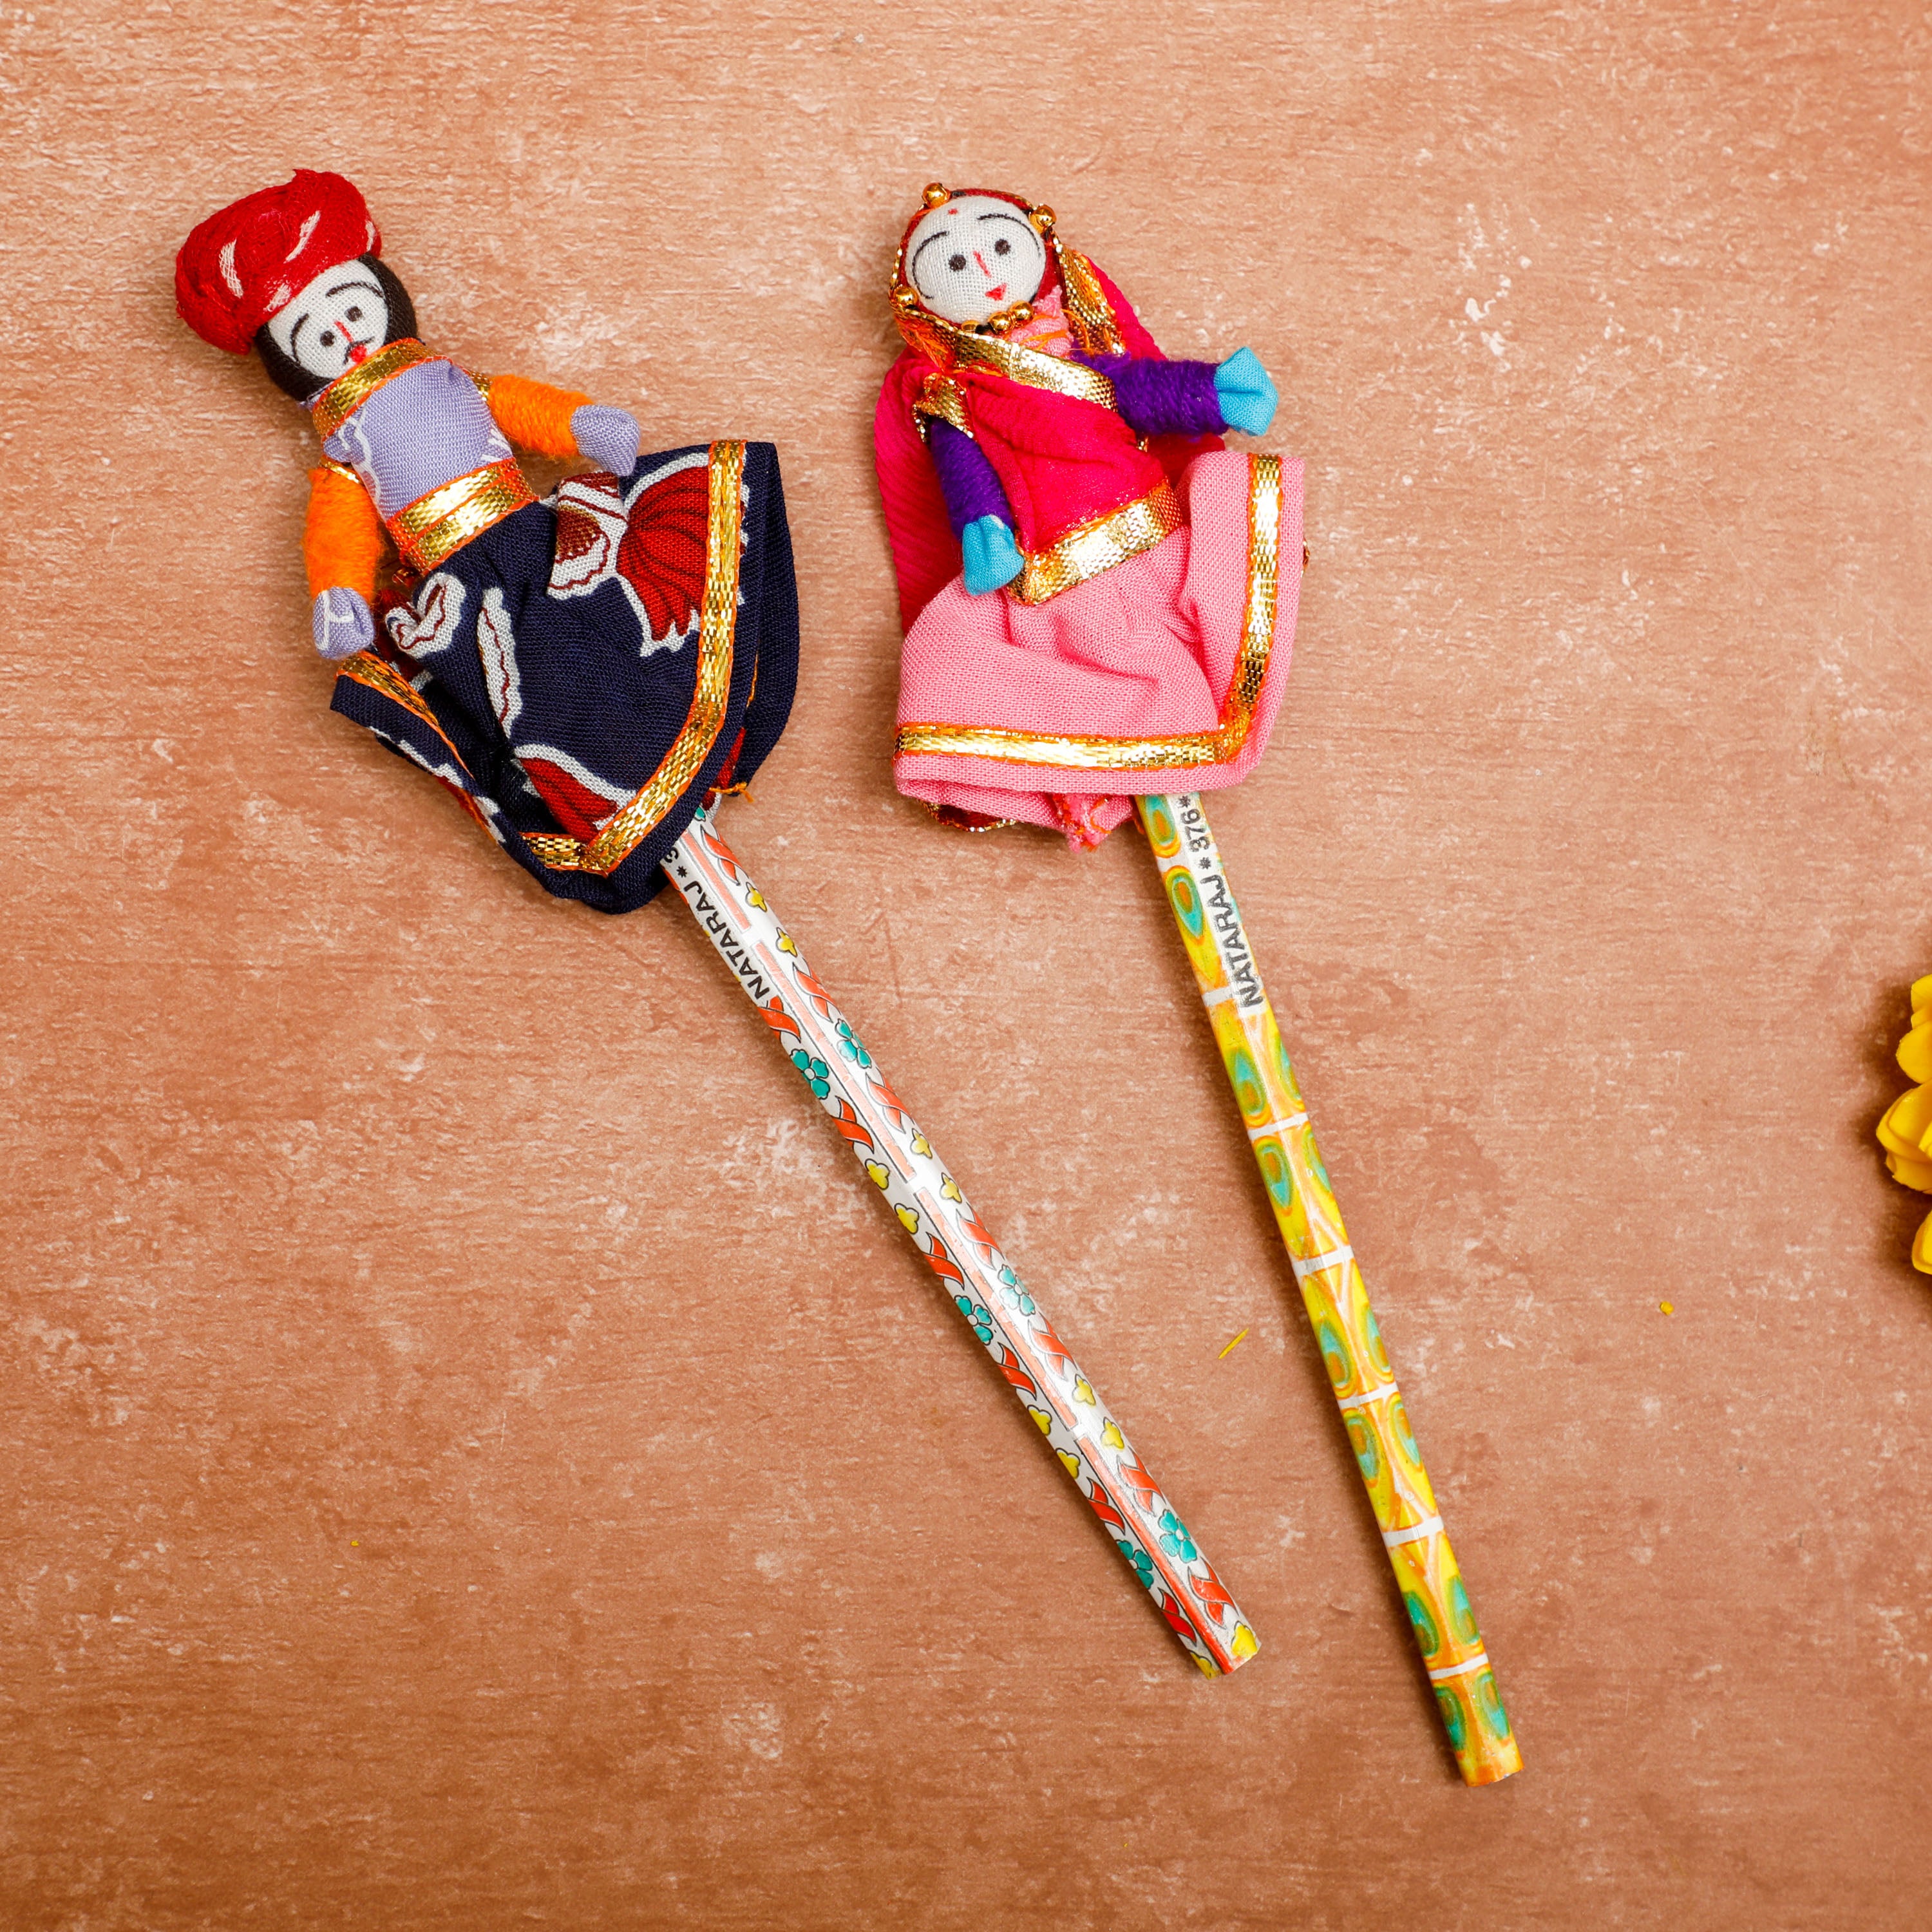 Shop Rajasthani Puppet Pencil for Gifting in USA